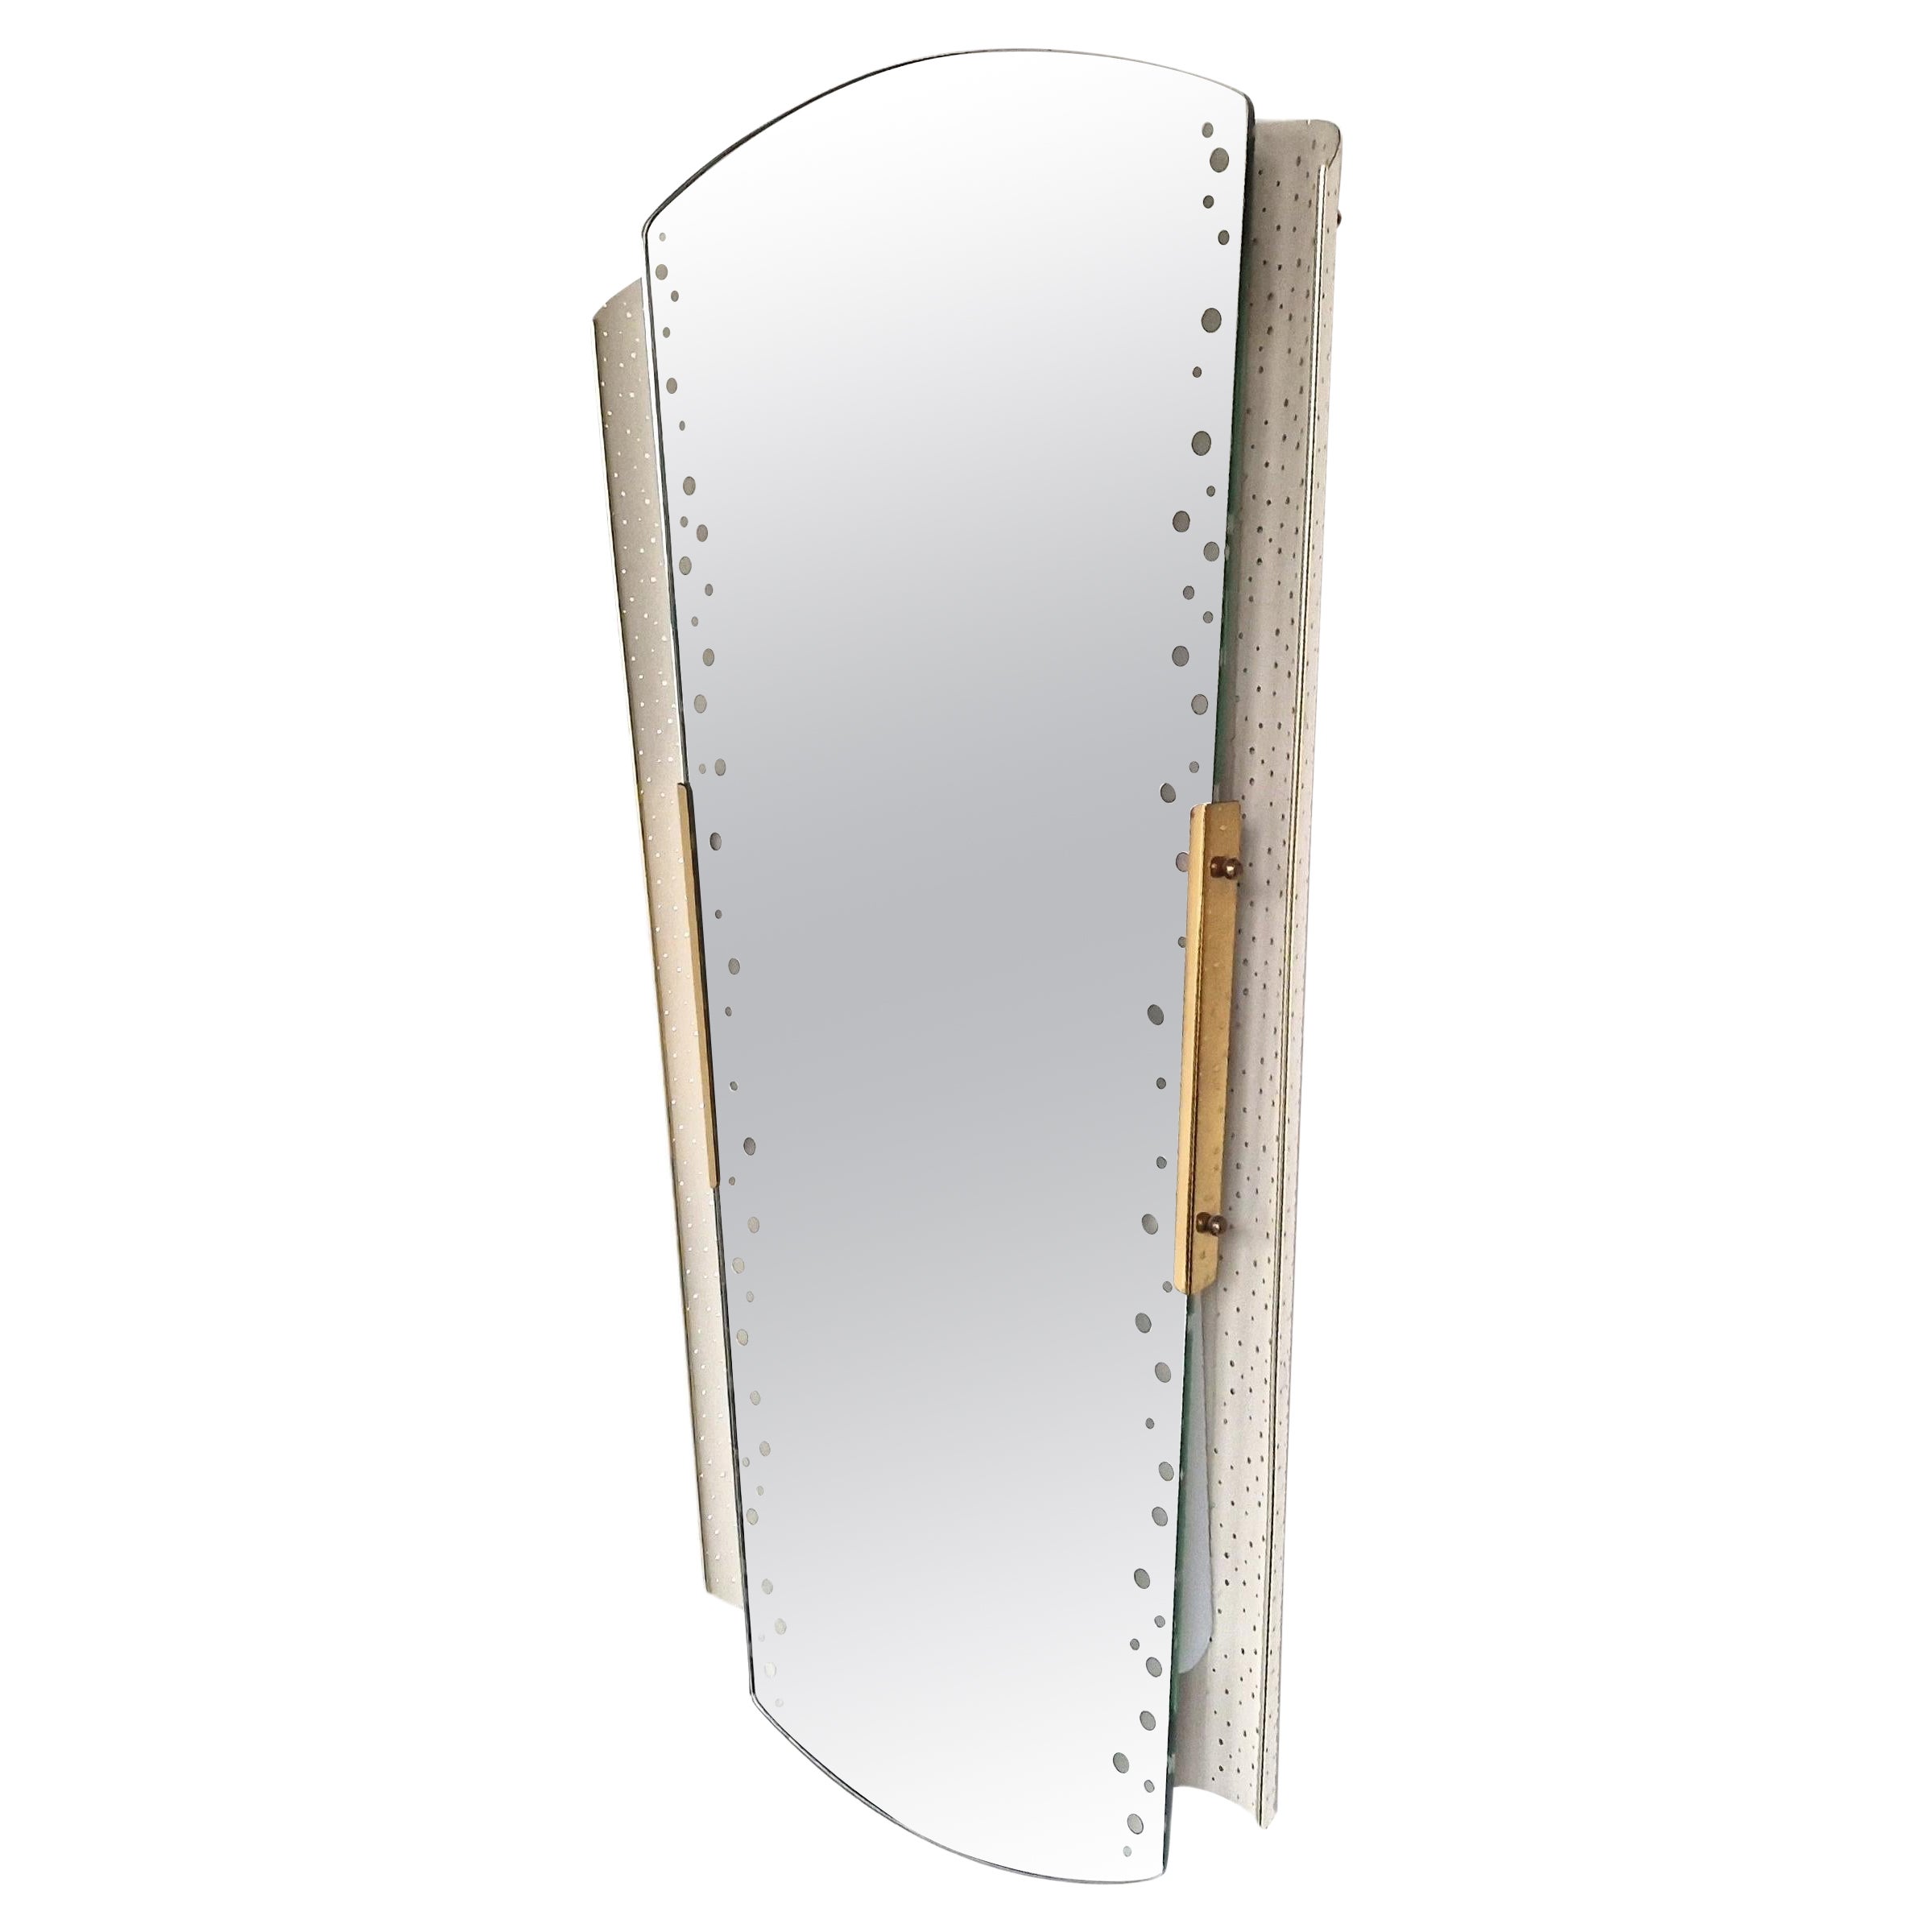 Perforated mirror lamp by Ernest Igl for Hillebrand, Germany 1950's For Sale